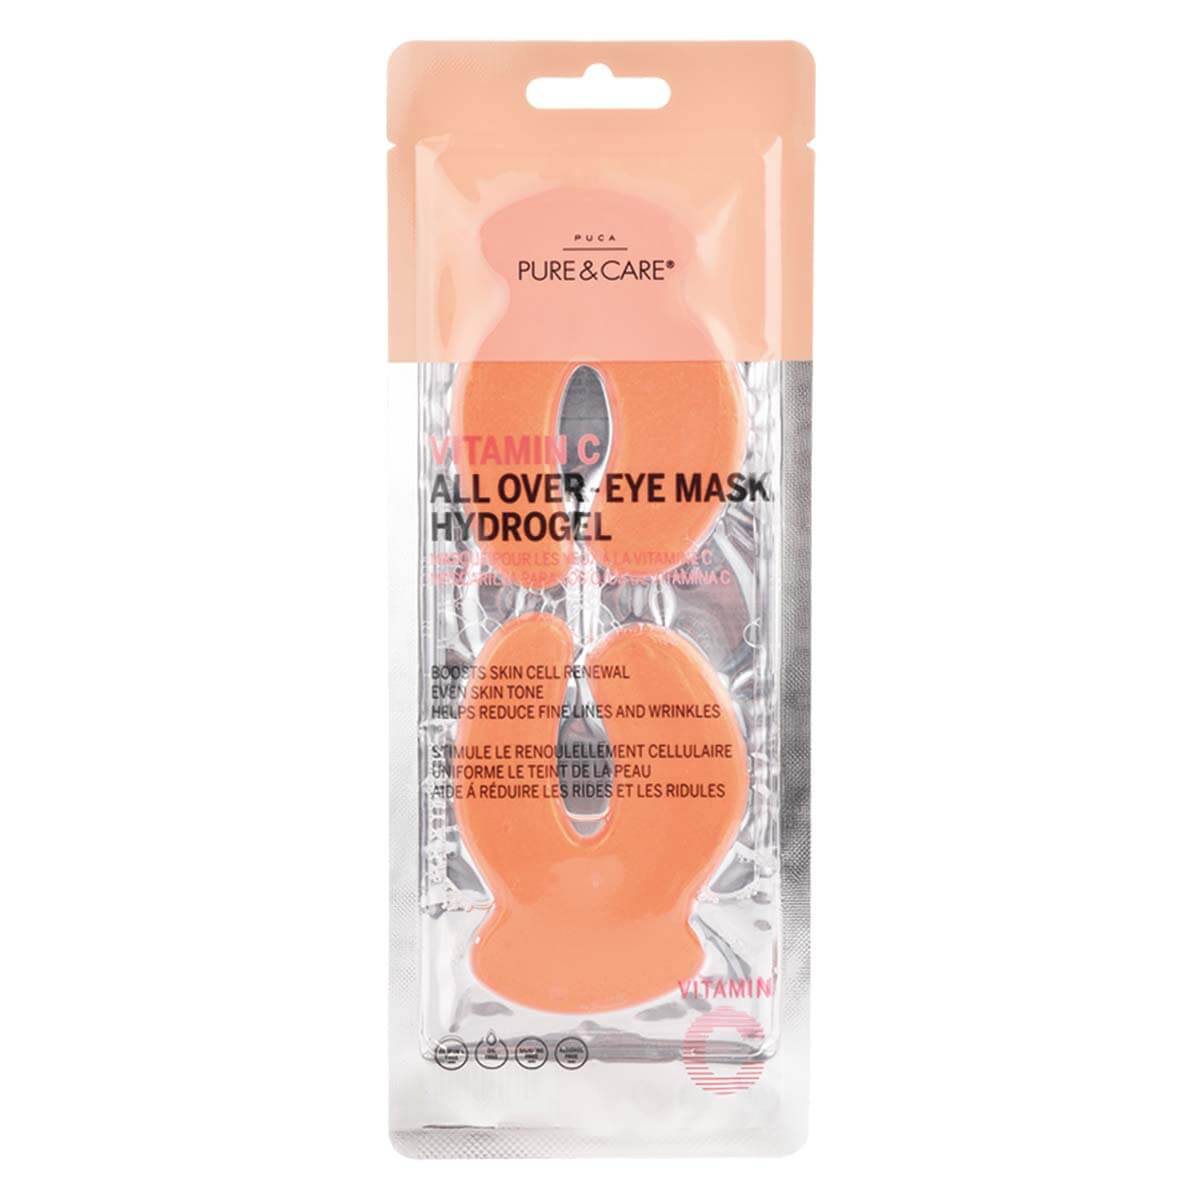 Vitamin C All Over Eye Mask Hydrogel | PUCA - PURE & CARE